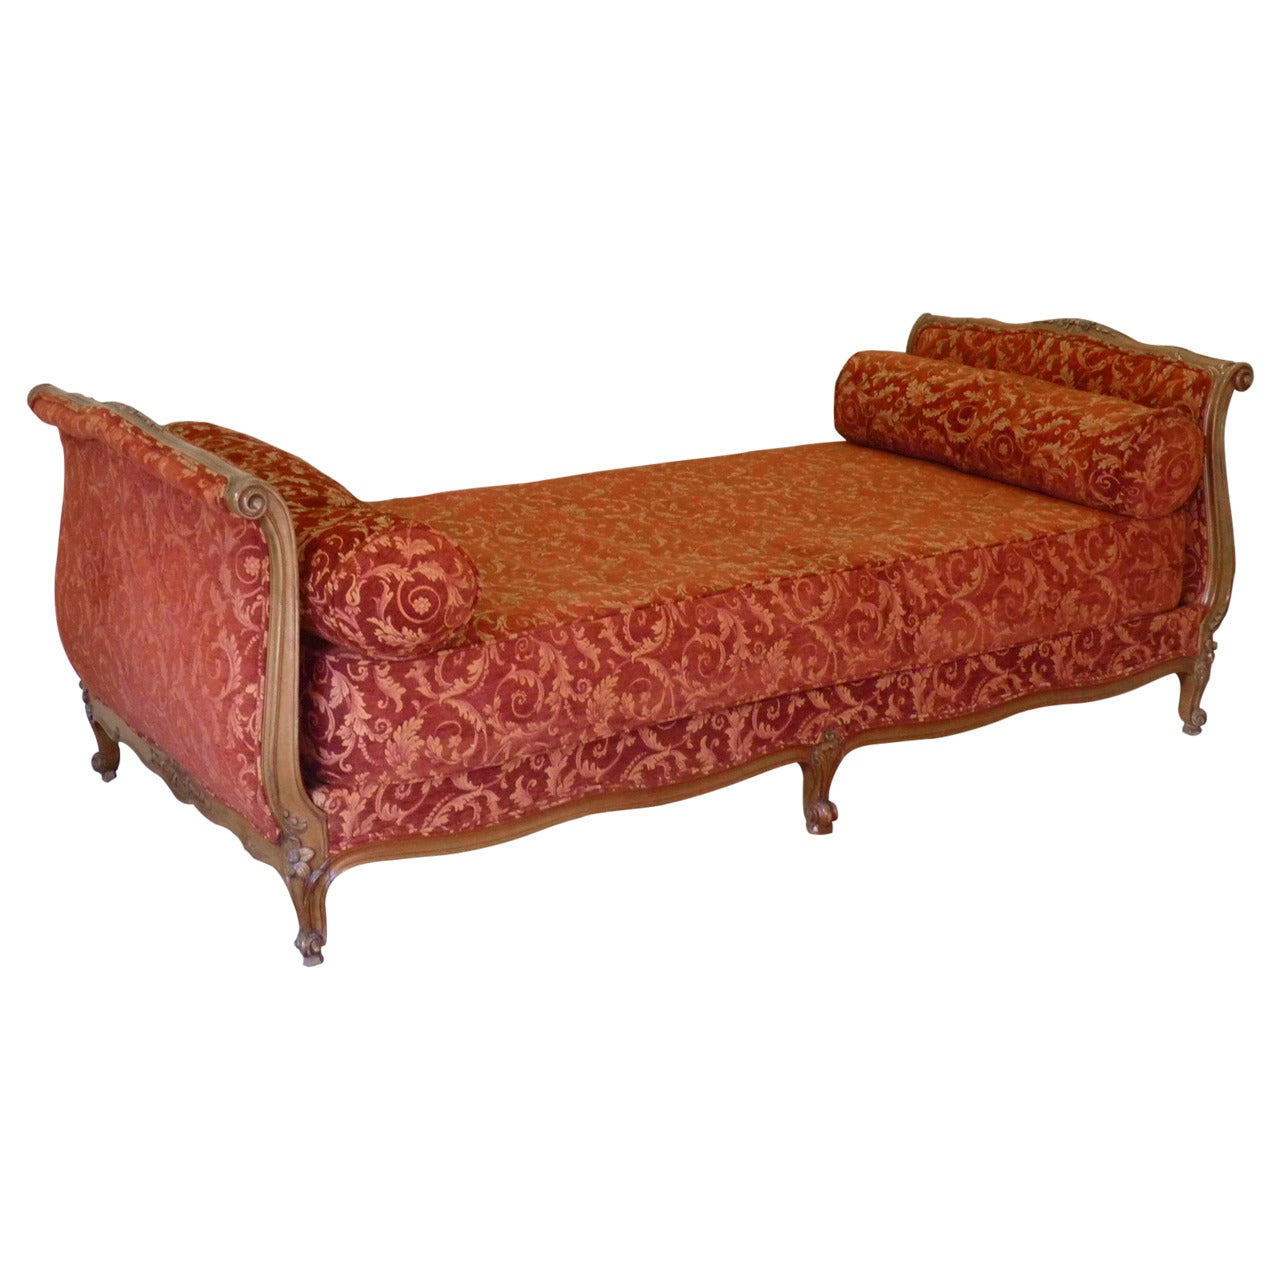 Upholstered Louis XV Style Day Bed